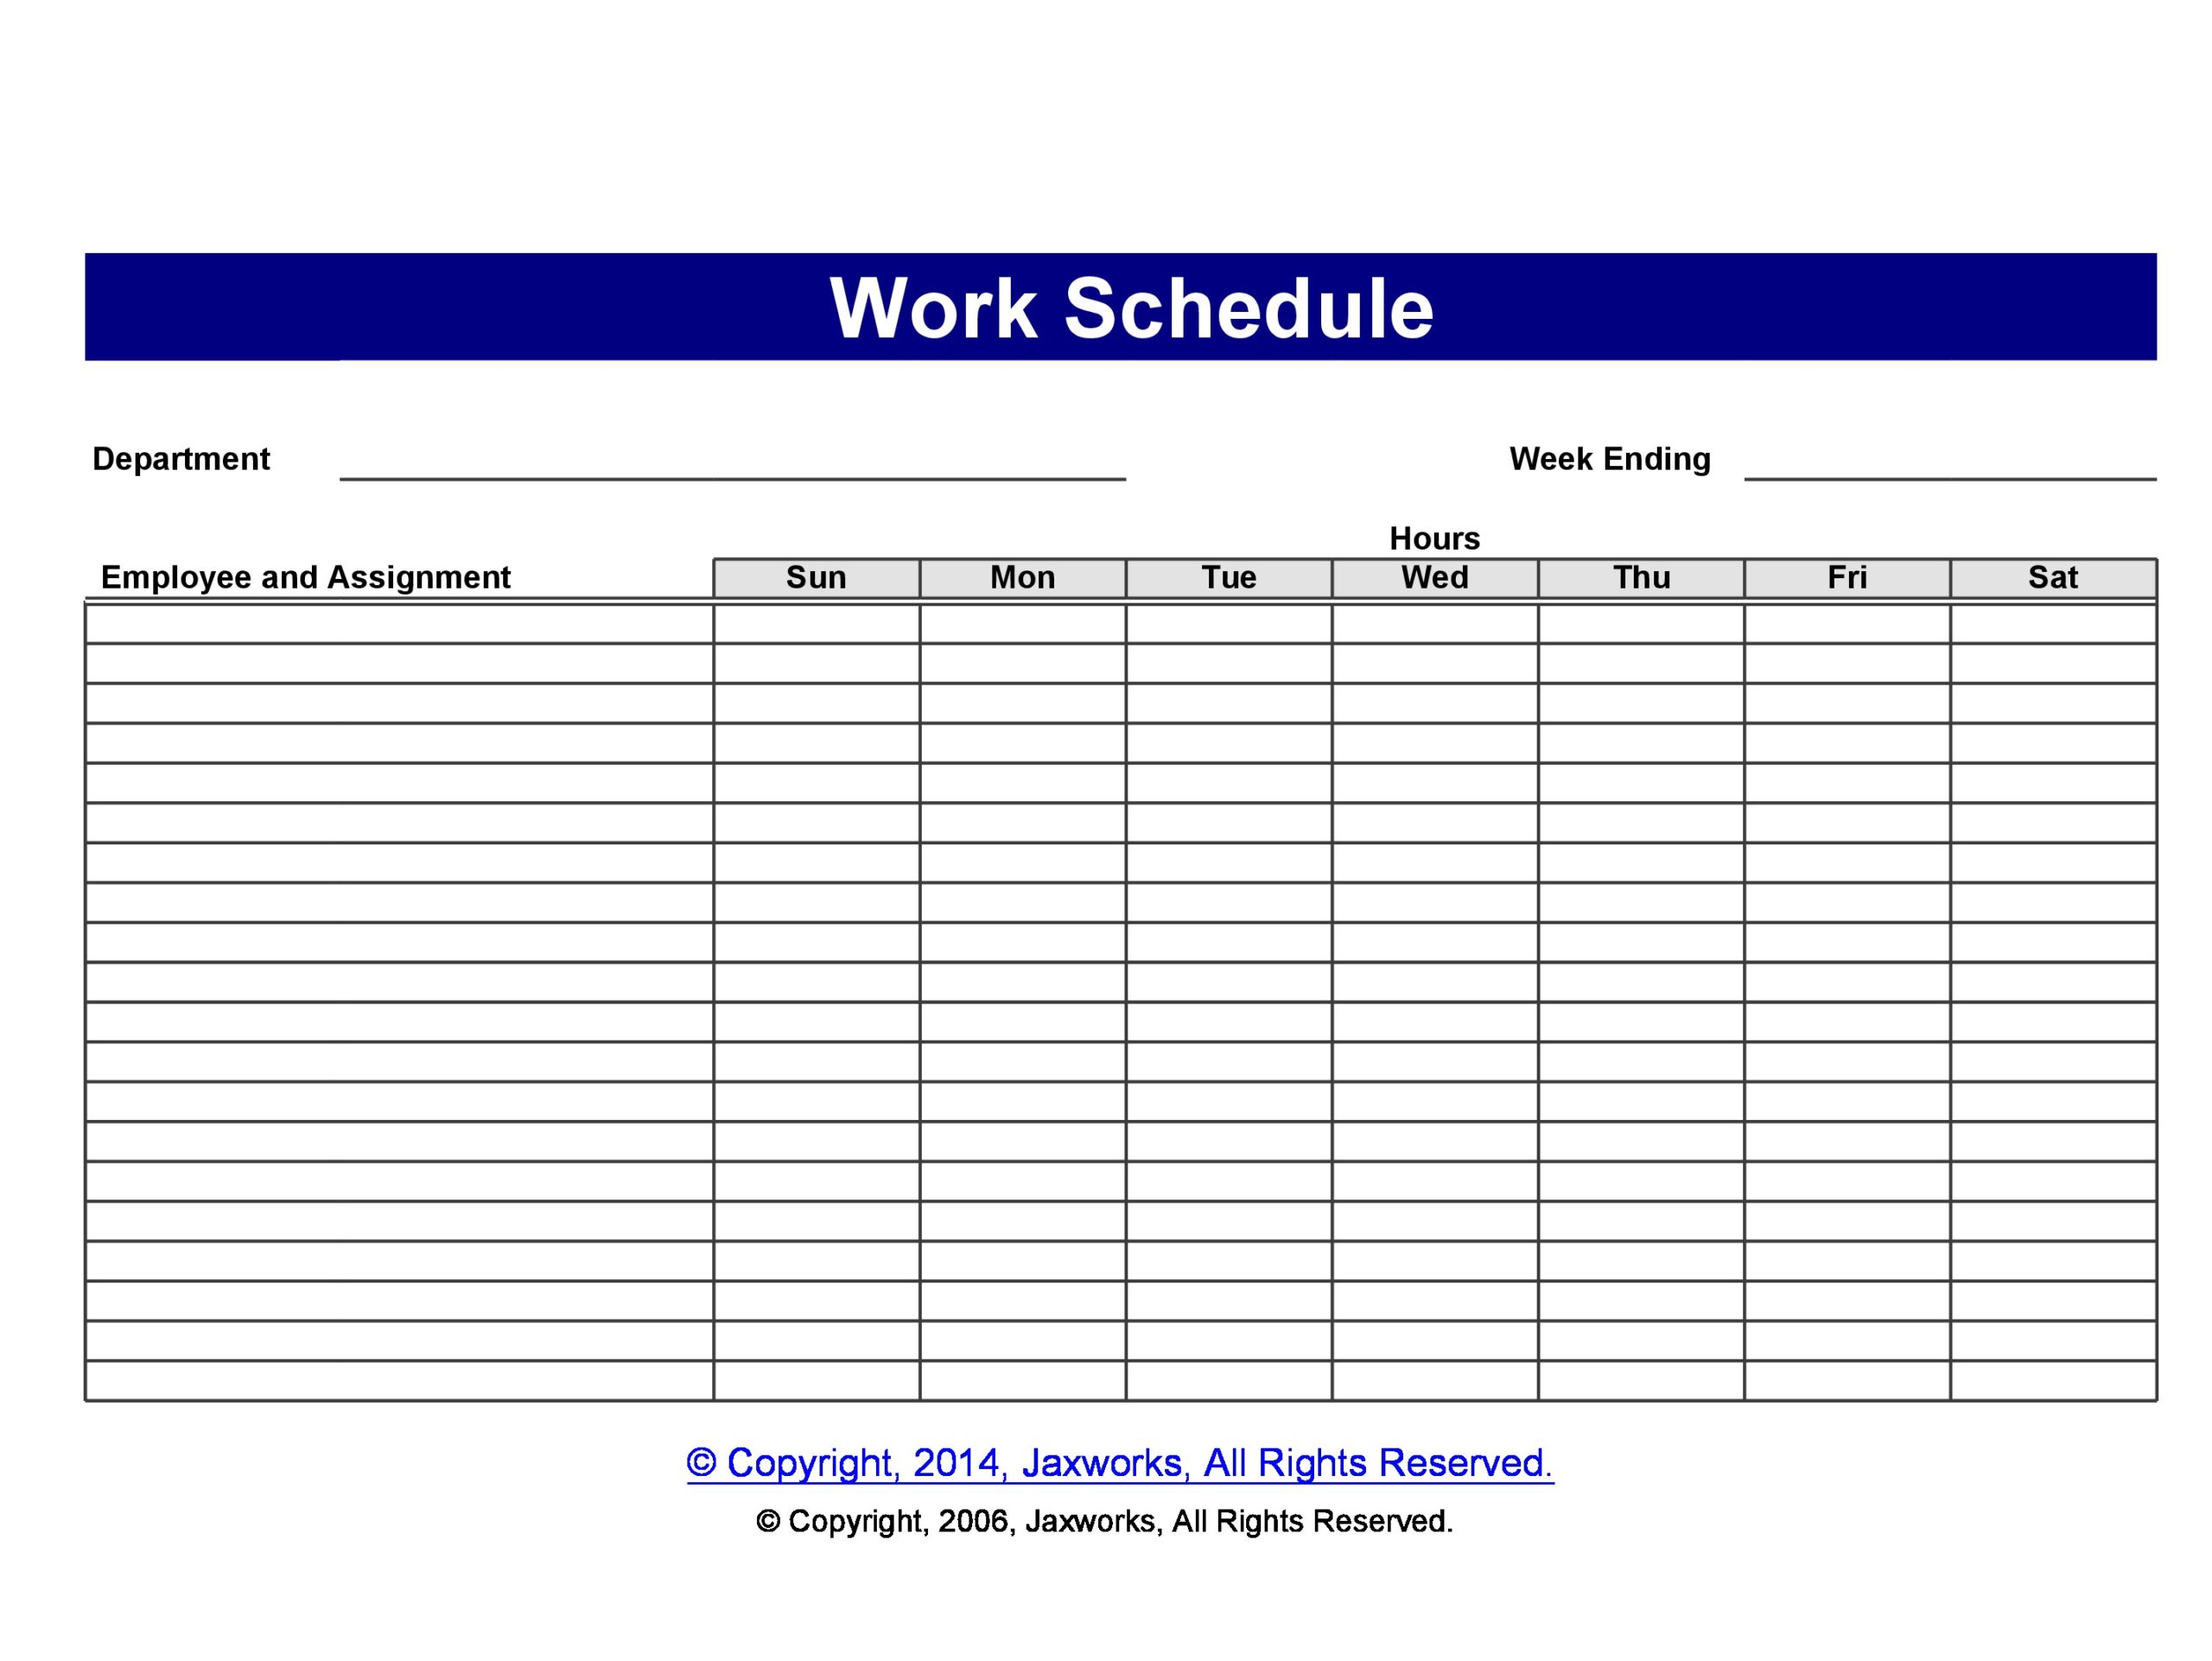 Work Schedule Template Printable Web Summary Request - vrogue.co